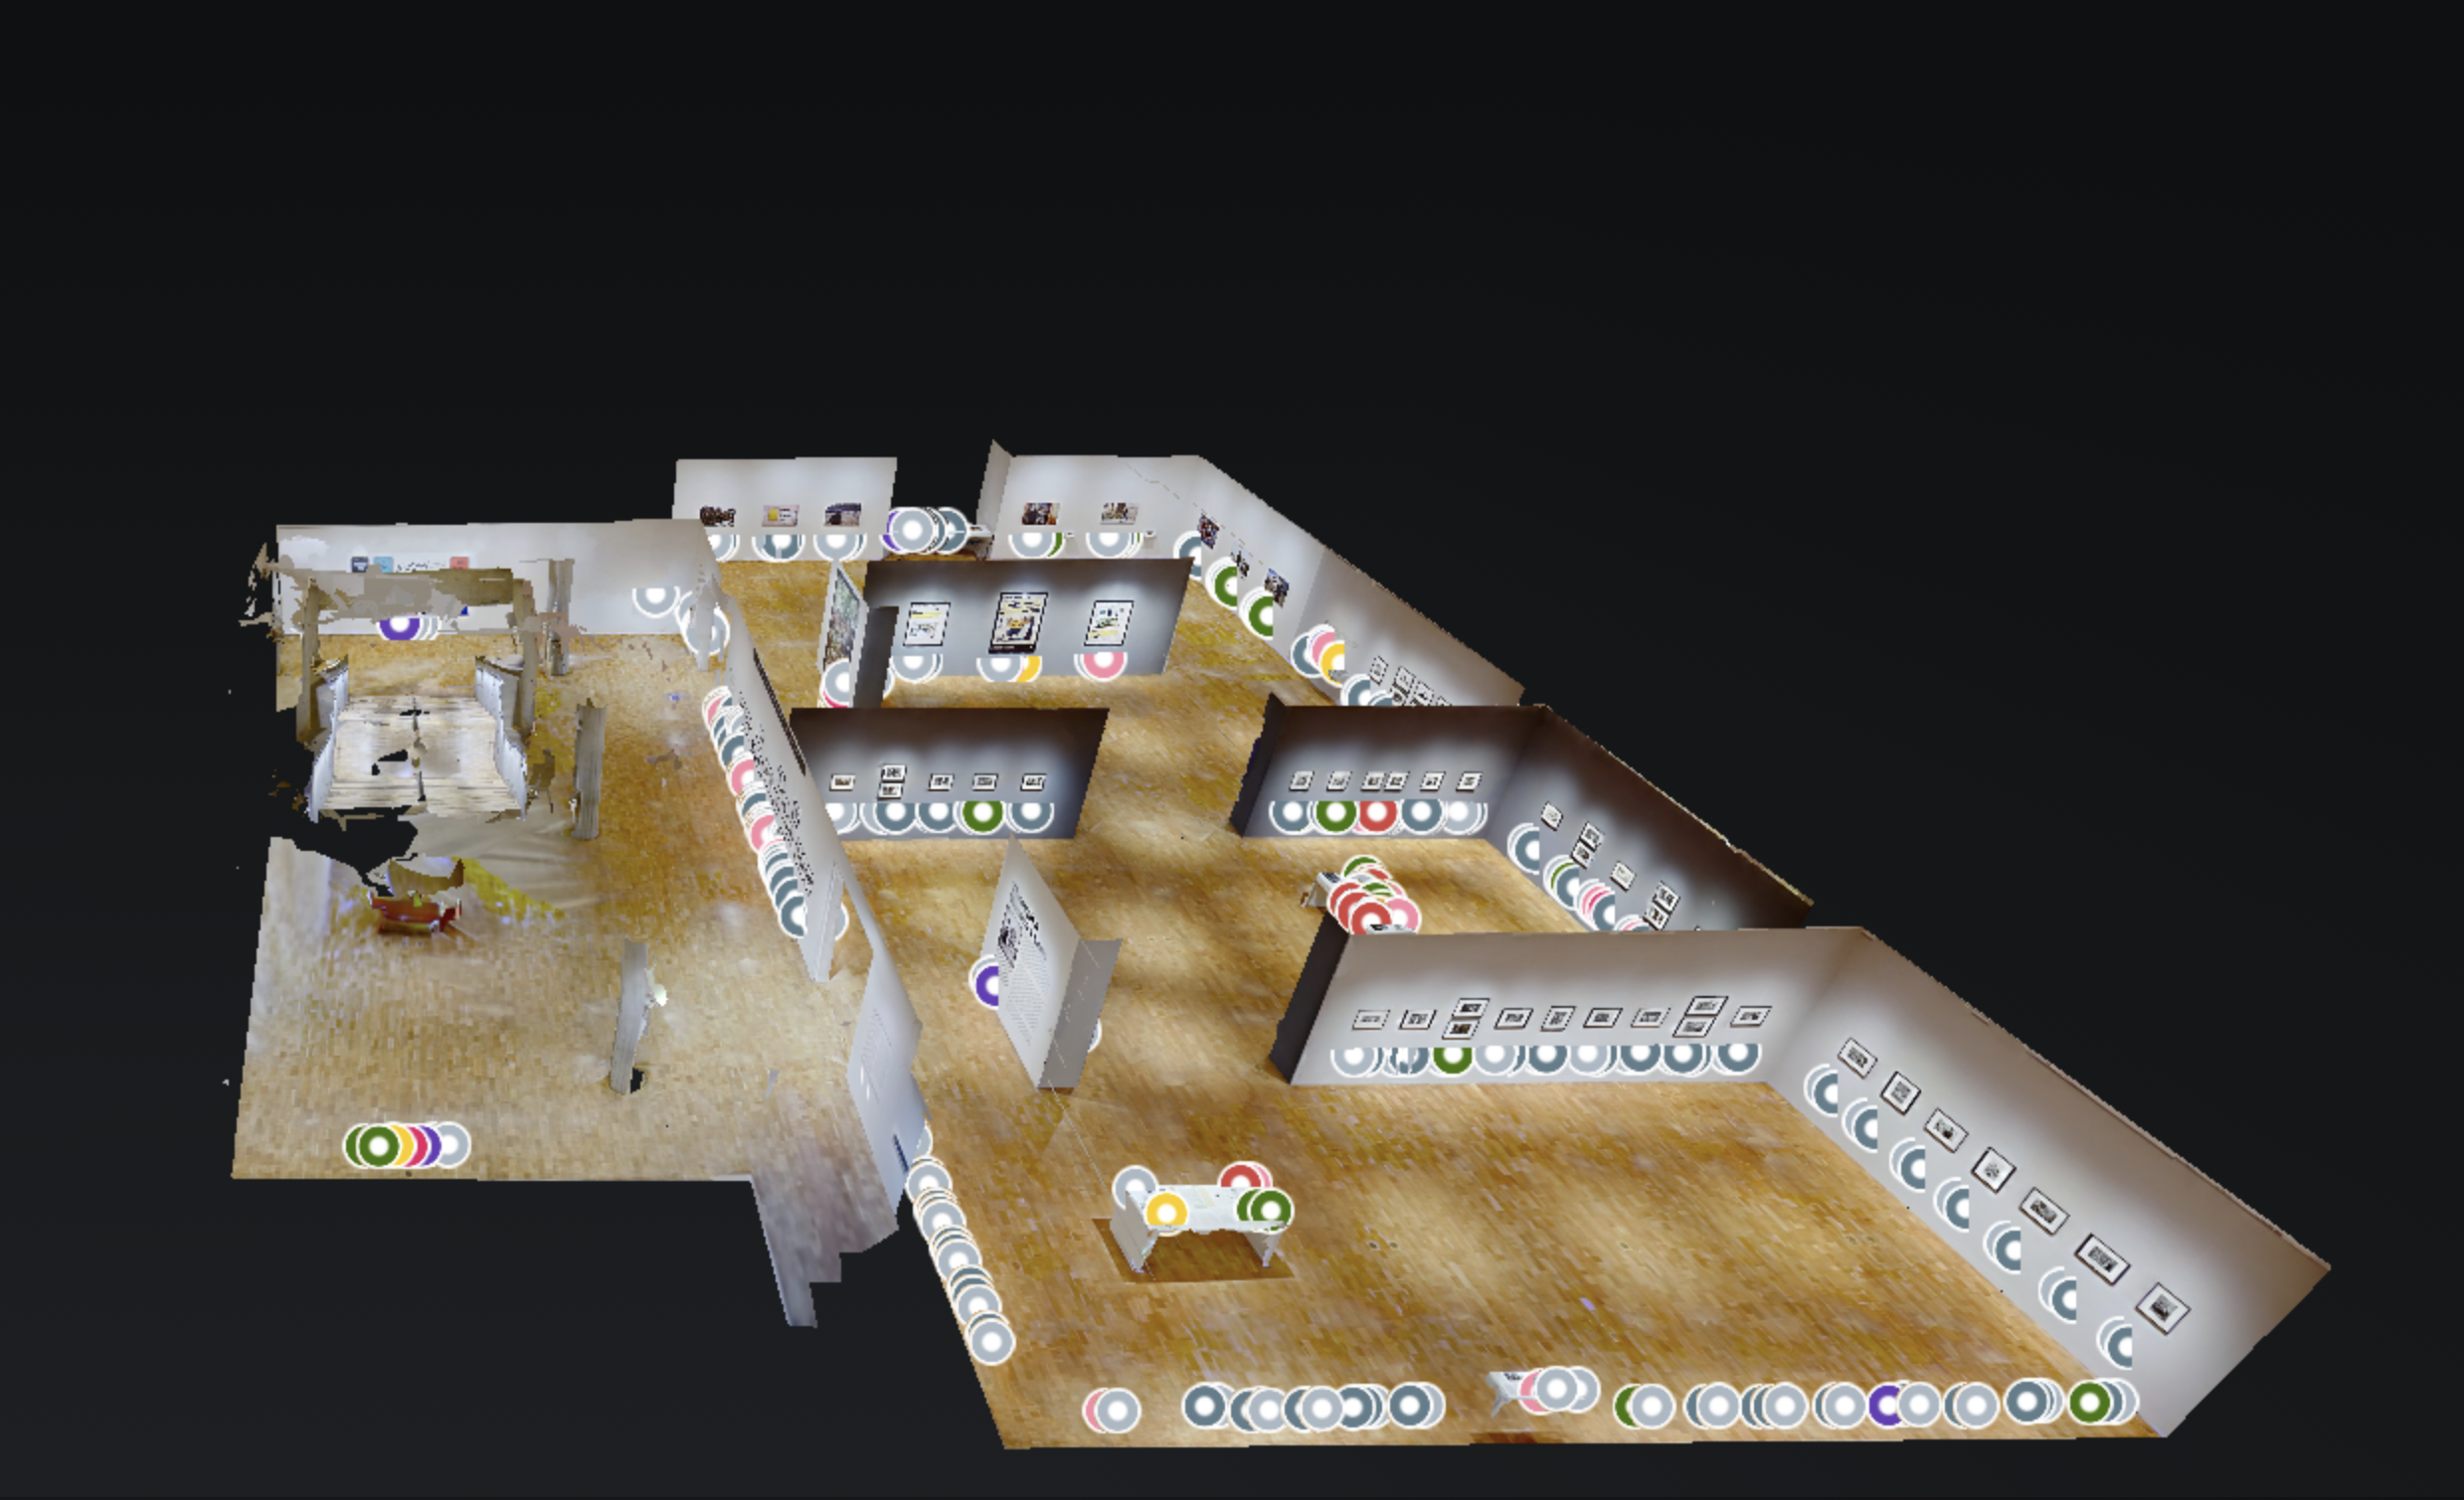 360 Virtual Exhibition -  Overview of the virtual layout space.